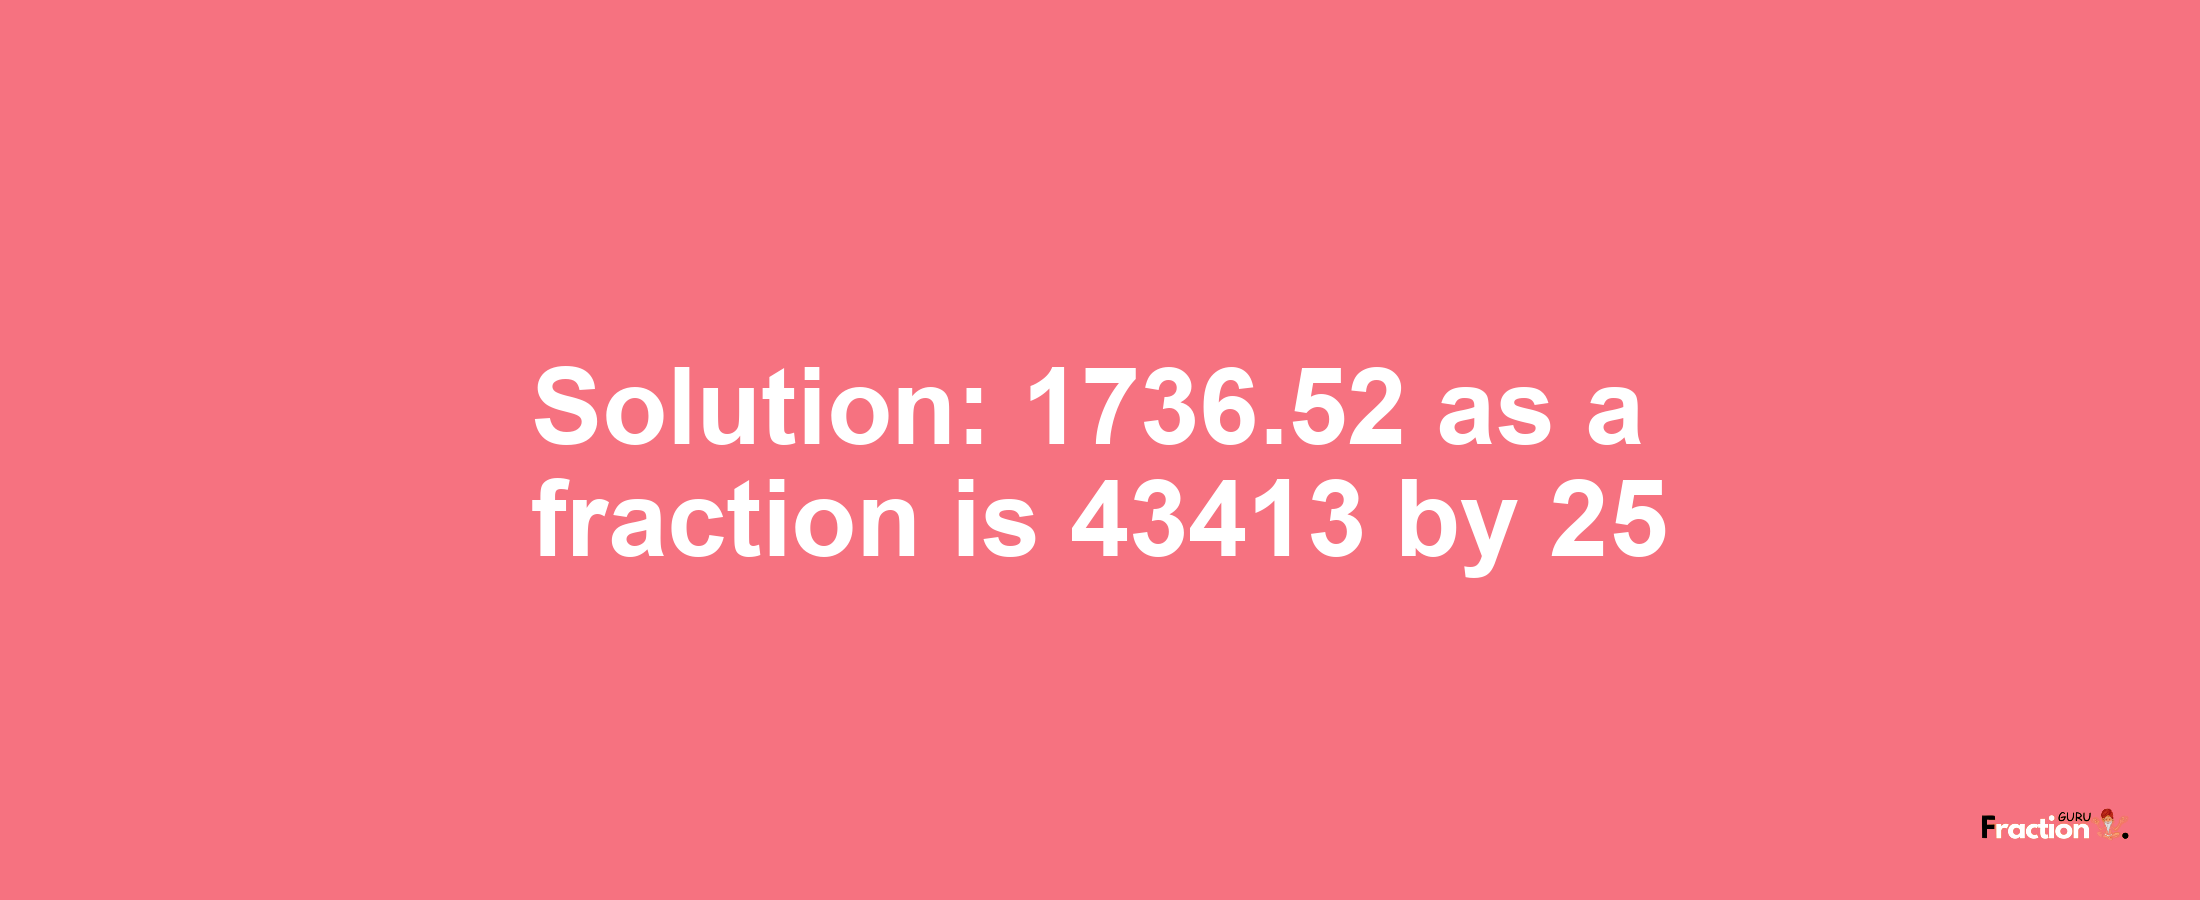 Solution:1736.52 as a fraction is 43413/25